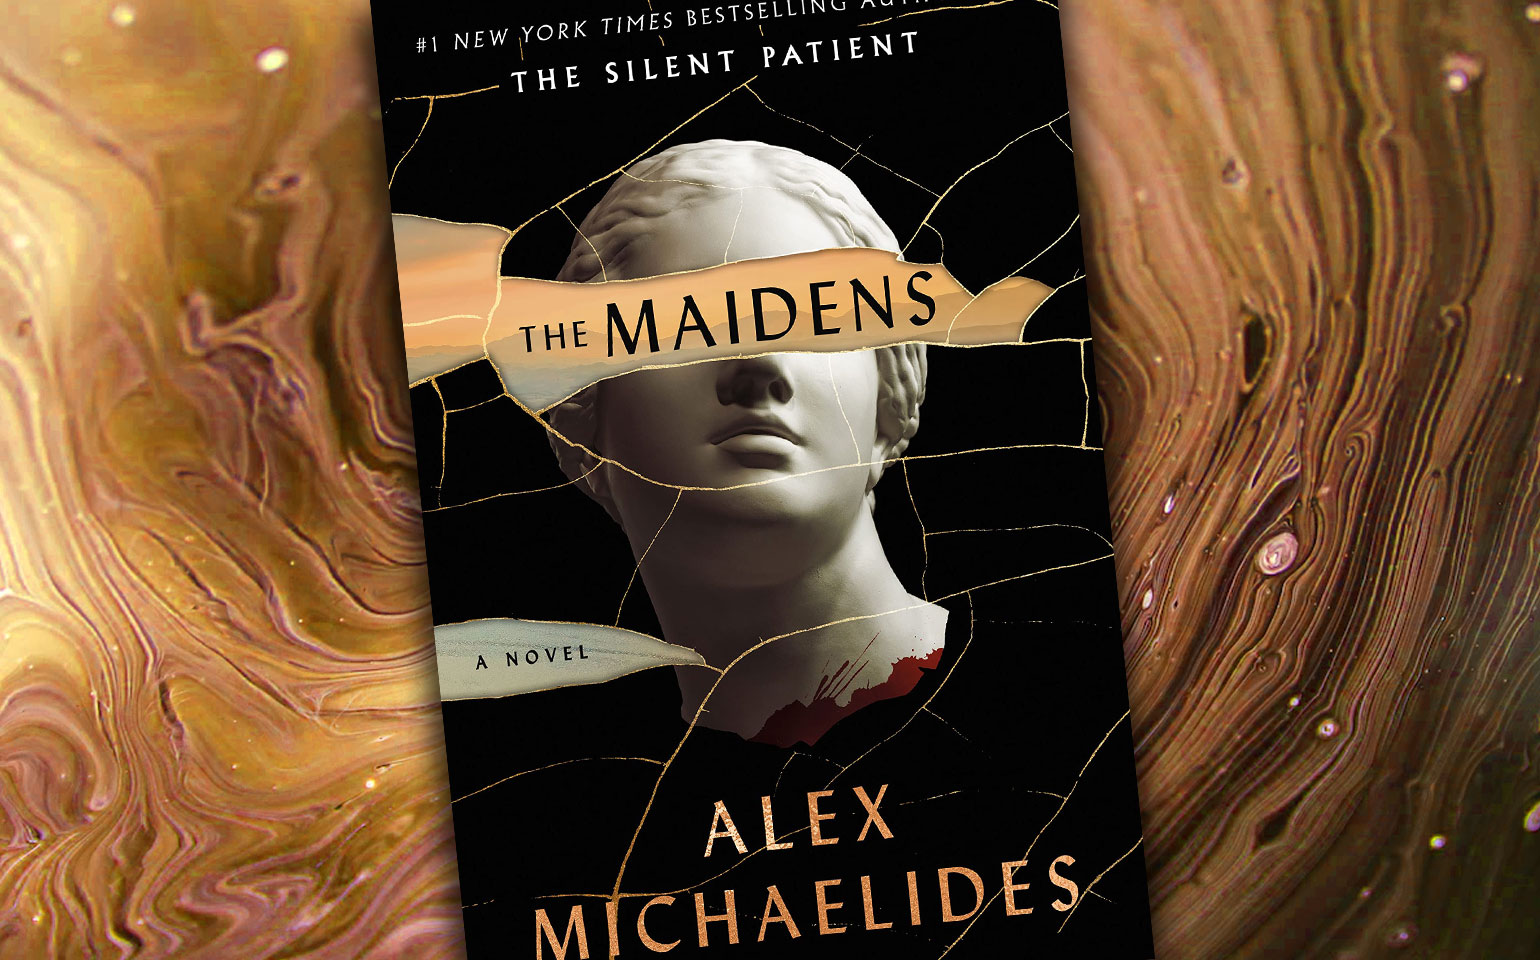 The cover of The Maidens is shown.